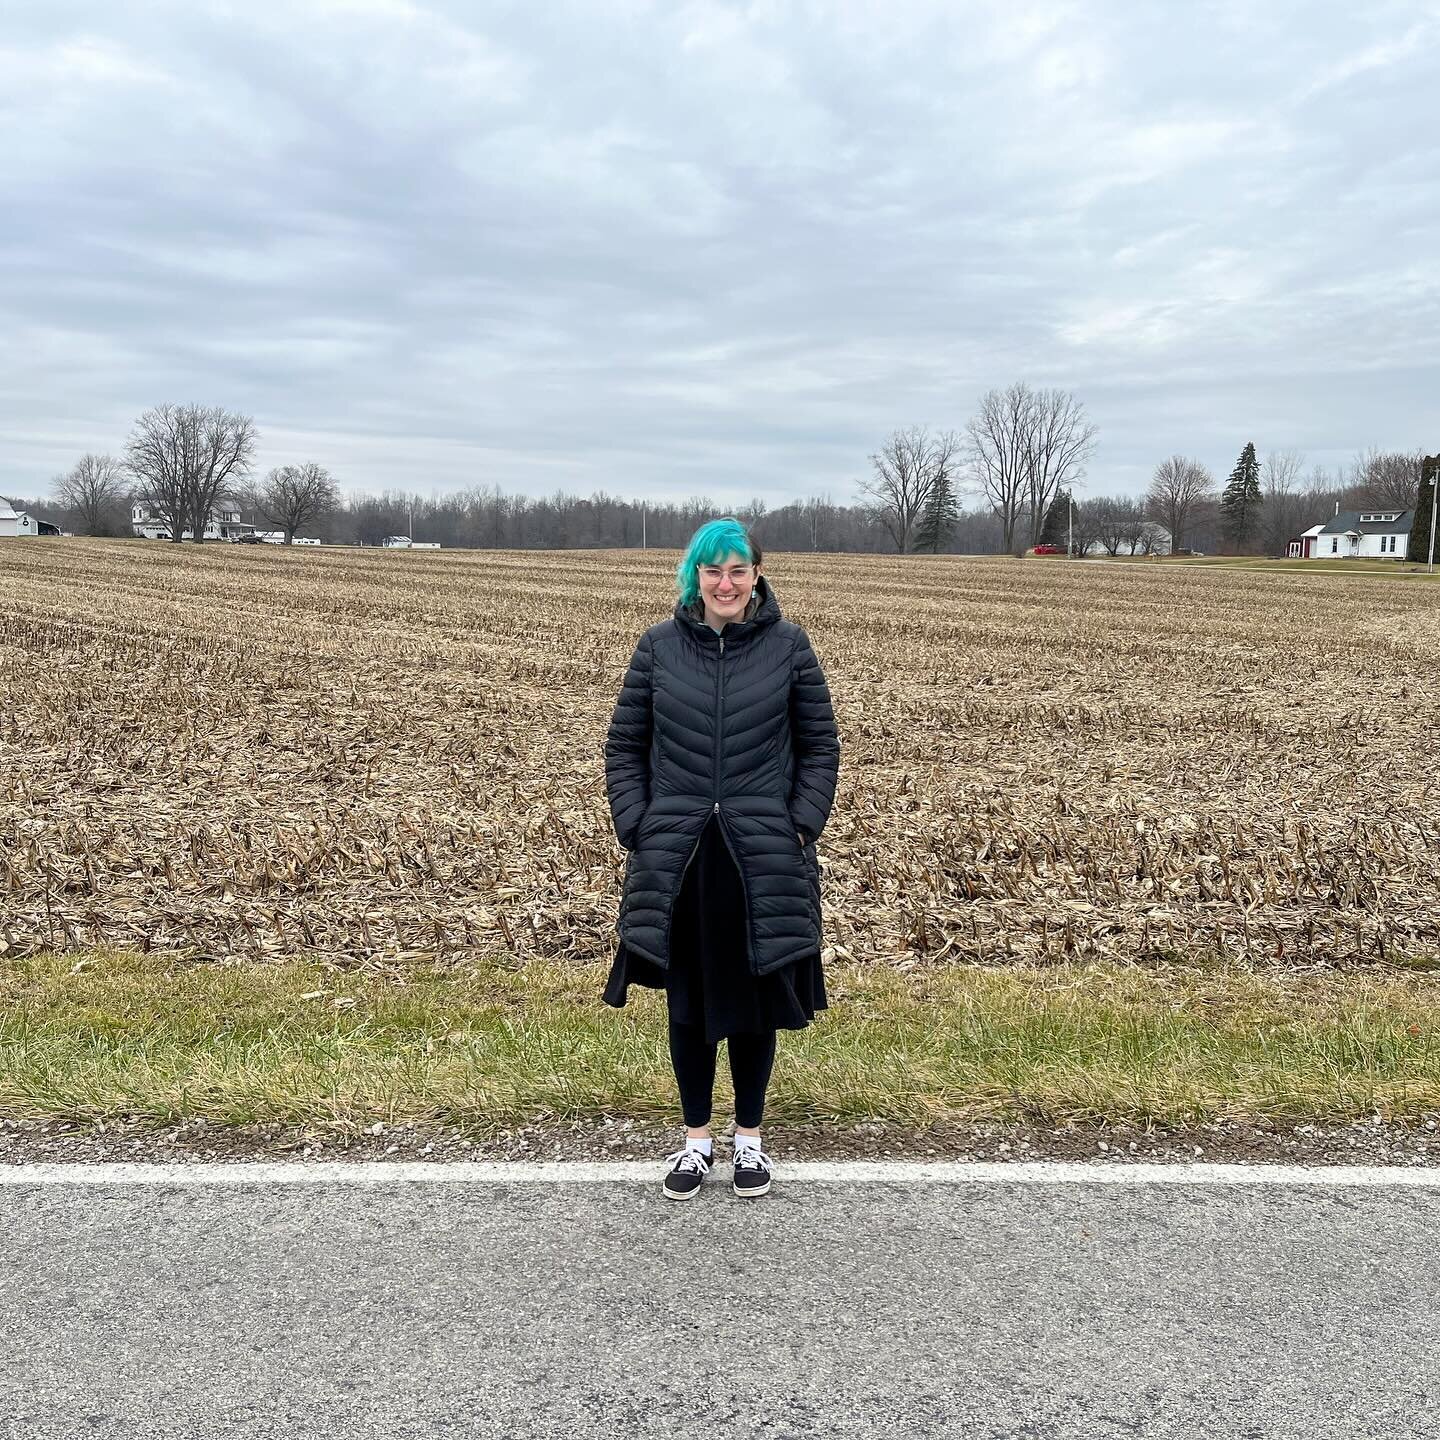 2023// Ohio winter vibes. Since it was actually warmer than normal this Christmas in Ohio, we were actually able to walk around the neighborhood without freezing to death on our annual visit to the fam. 
#ohio #ohiowinter #cornfields #globetrekkingge